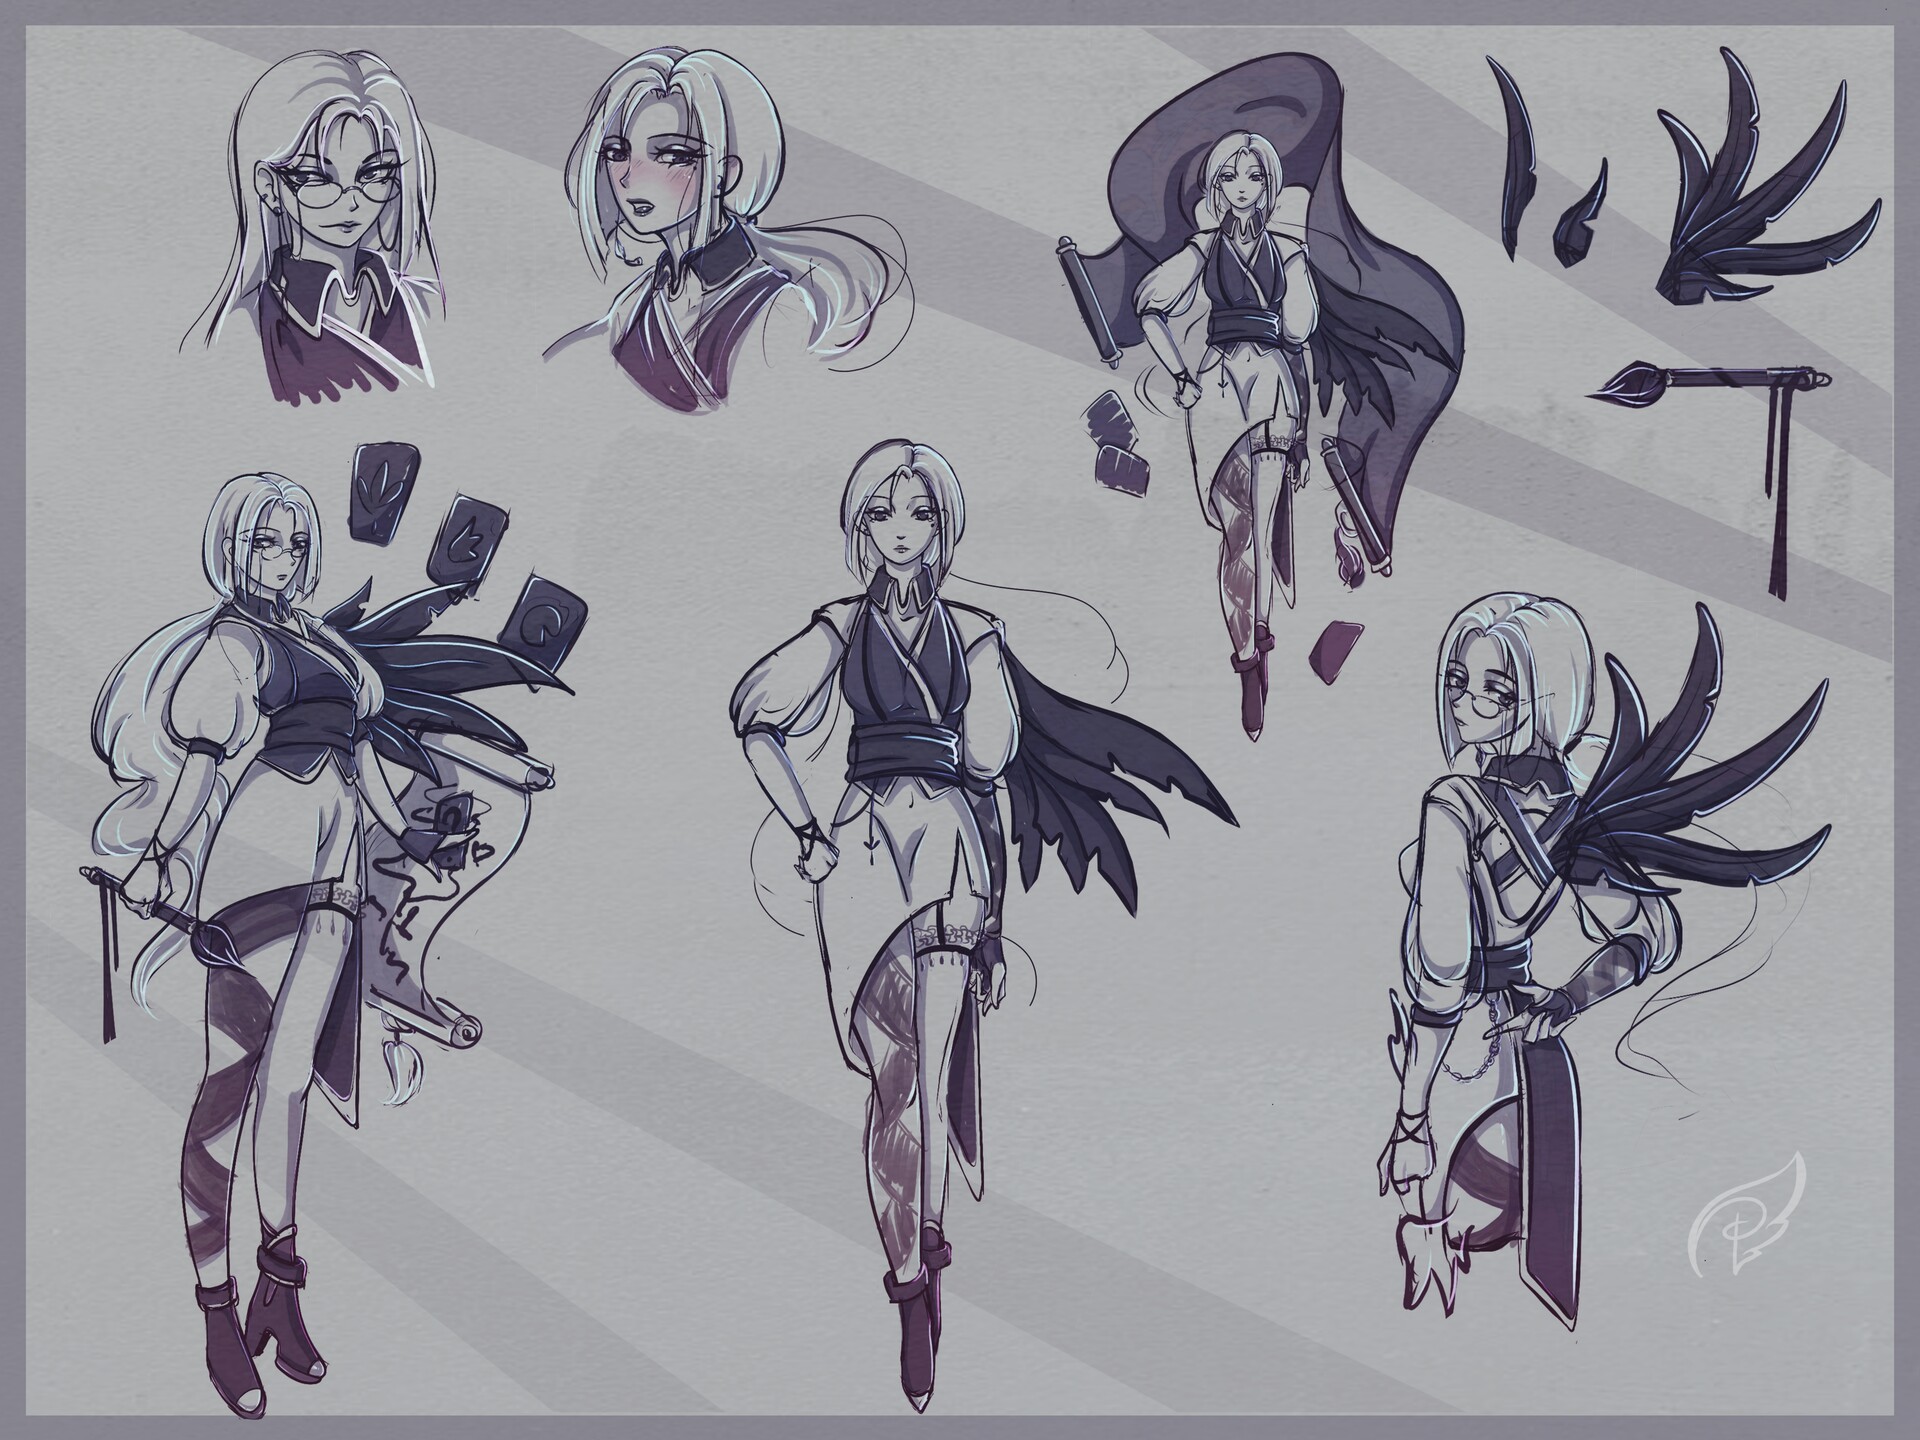 Sketch of an Anime Character Concept by AiArtQueen on DeviantArt